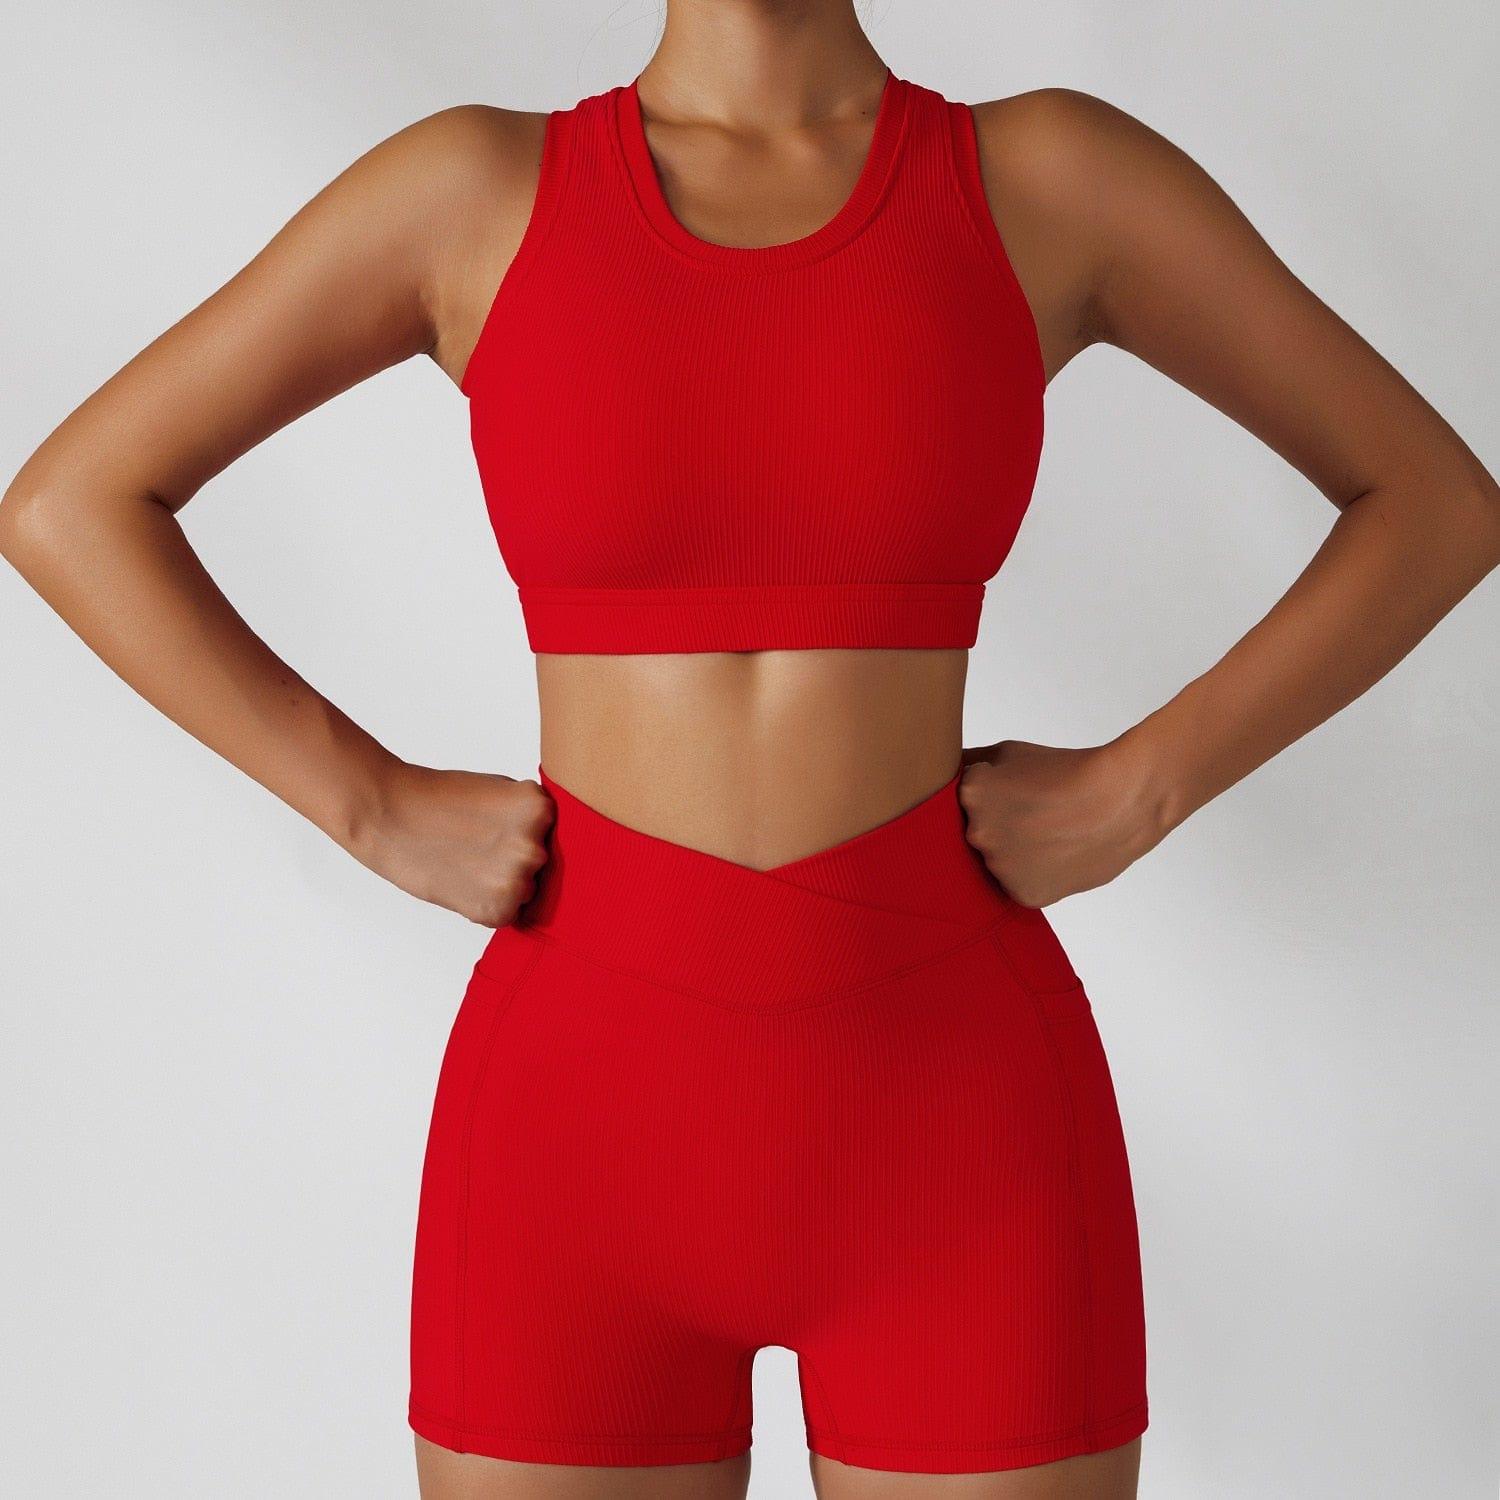 Shop 0 Red suit-2 / S / China 2 Pieces Seamless Women Tracksuit  Yoga Set Running Workout Sportswear Gym Clothes Fitness Bra High Waist Leggings Sports Suit Mademoiselle Home Decor